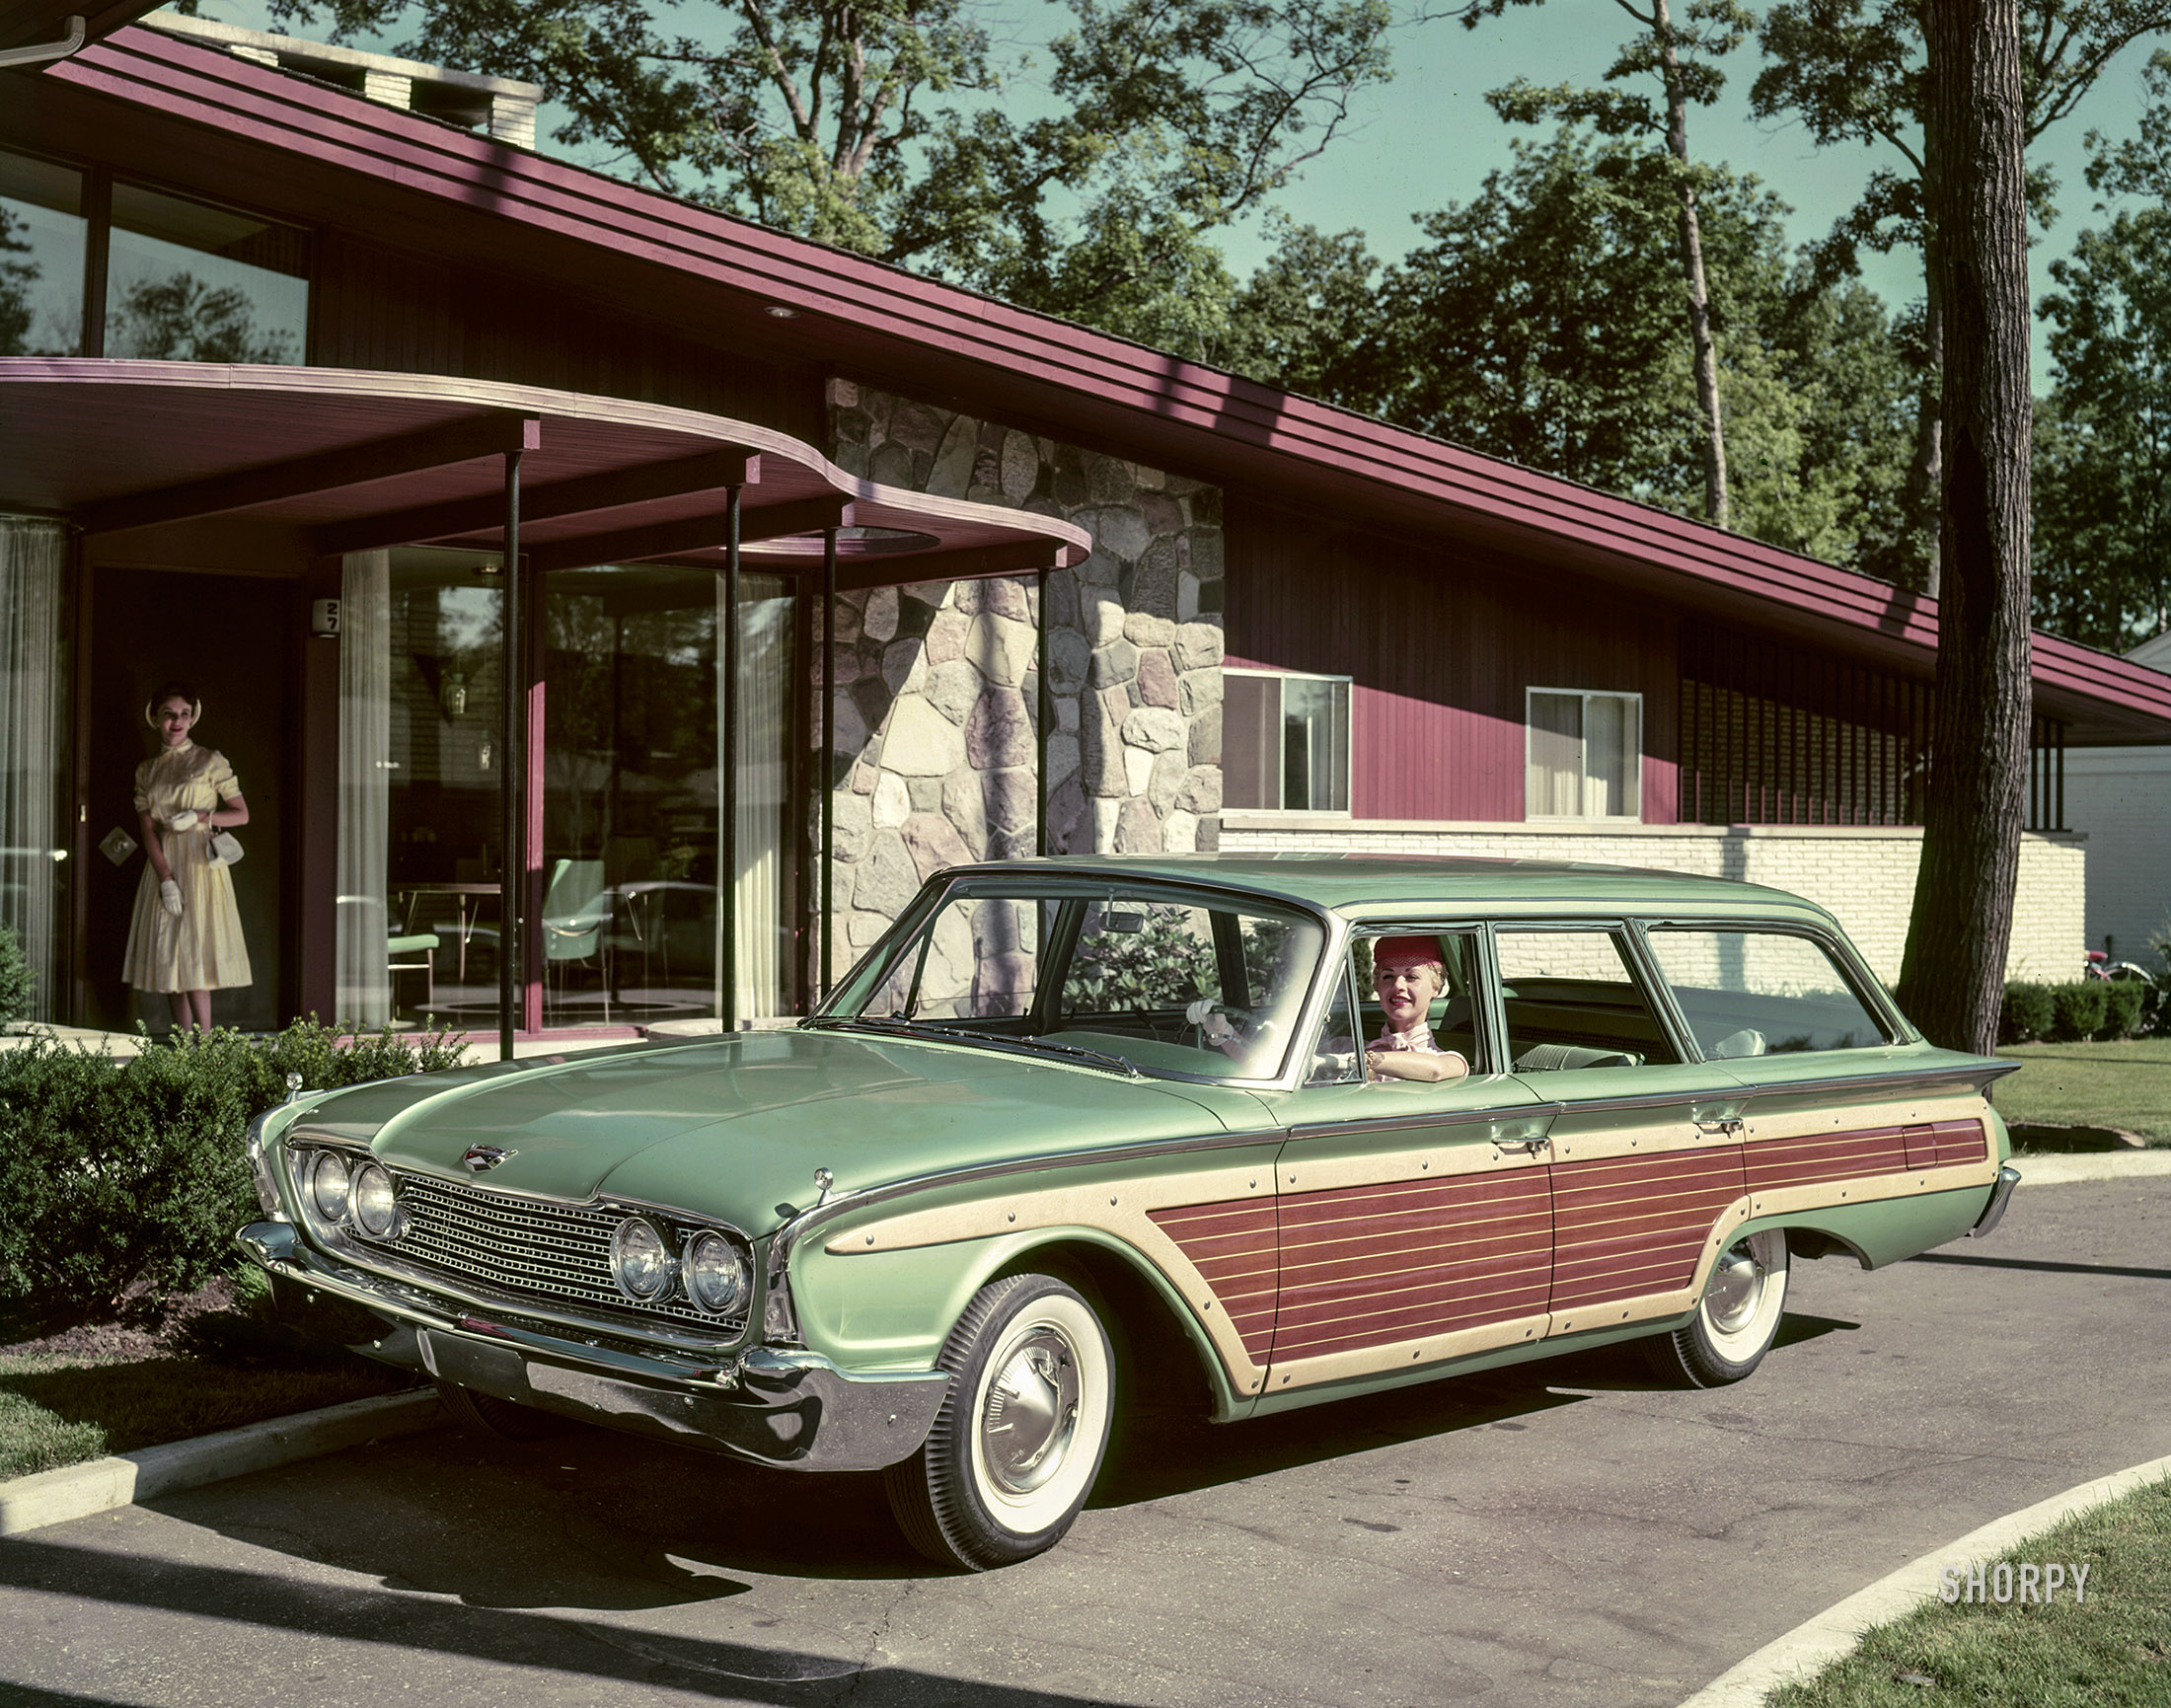 "1960 Ford Country Squire nine-passenger station wagon." Color transparency from the Ford Motor Co. photographic archive. View full size.
NEW FORD TO SET RECORD FOR SIZE
&nbsp; &nbsp; &nbsp; &nbsp; DEARBORN, Mich., Sept. 24 -- The 1960 standard size Ford will be the longest, lowest and widest in the fifty-six-year history of the Ford Motor Company. At a preview today it was made known that the regular Ford line had grown nearly six inches in length, five inches in width and was an inch lower than the 1959 models ...
-- New York Times, Sept. 1959